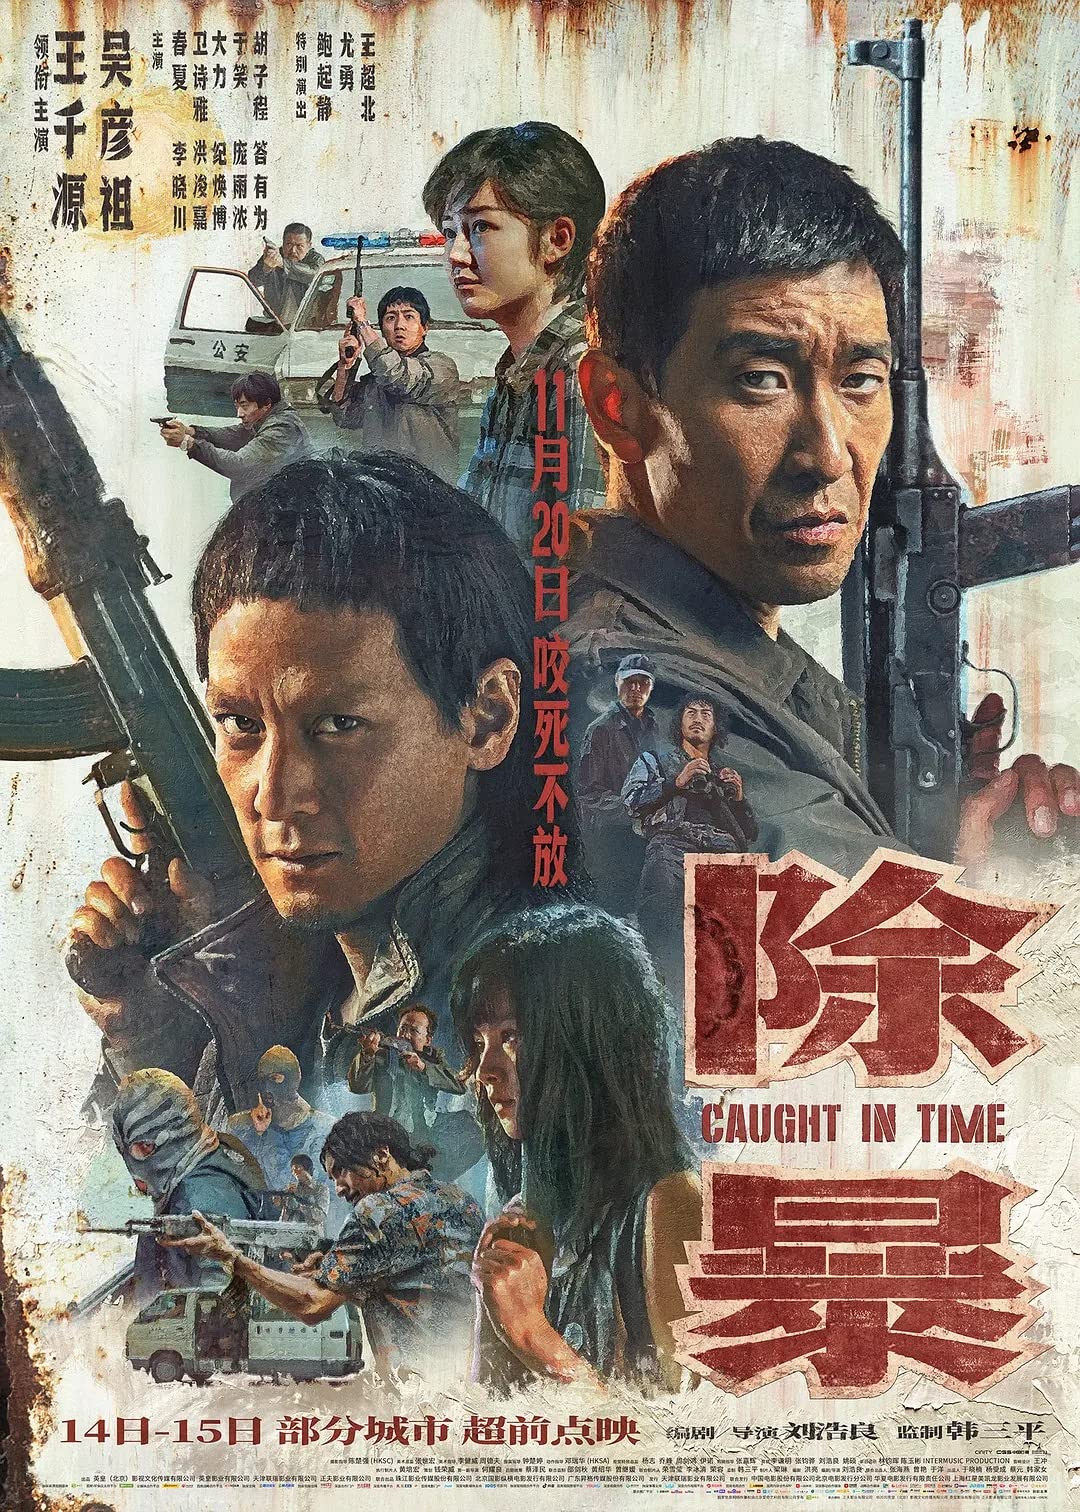 Download : Caught in Time (2020) – Chinese Movie